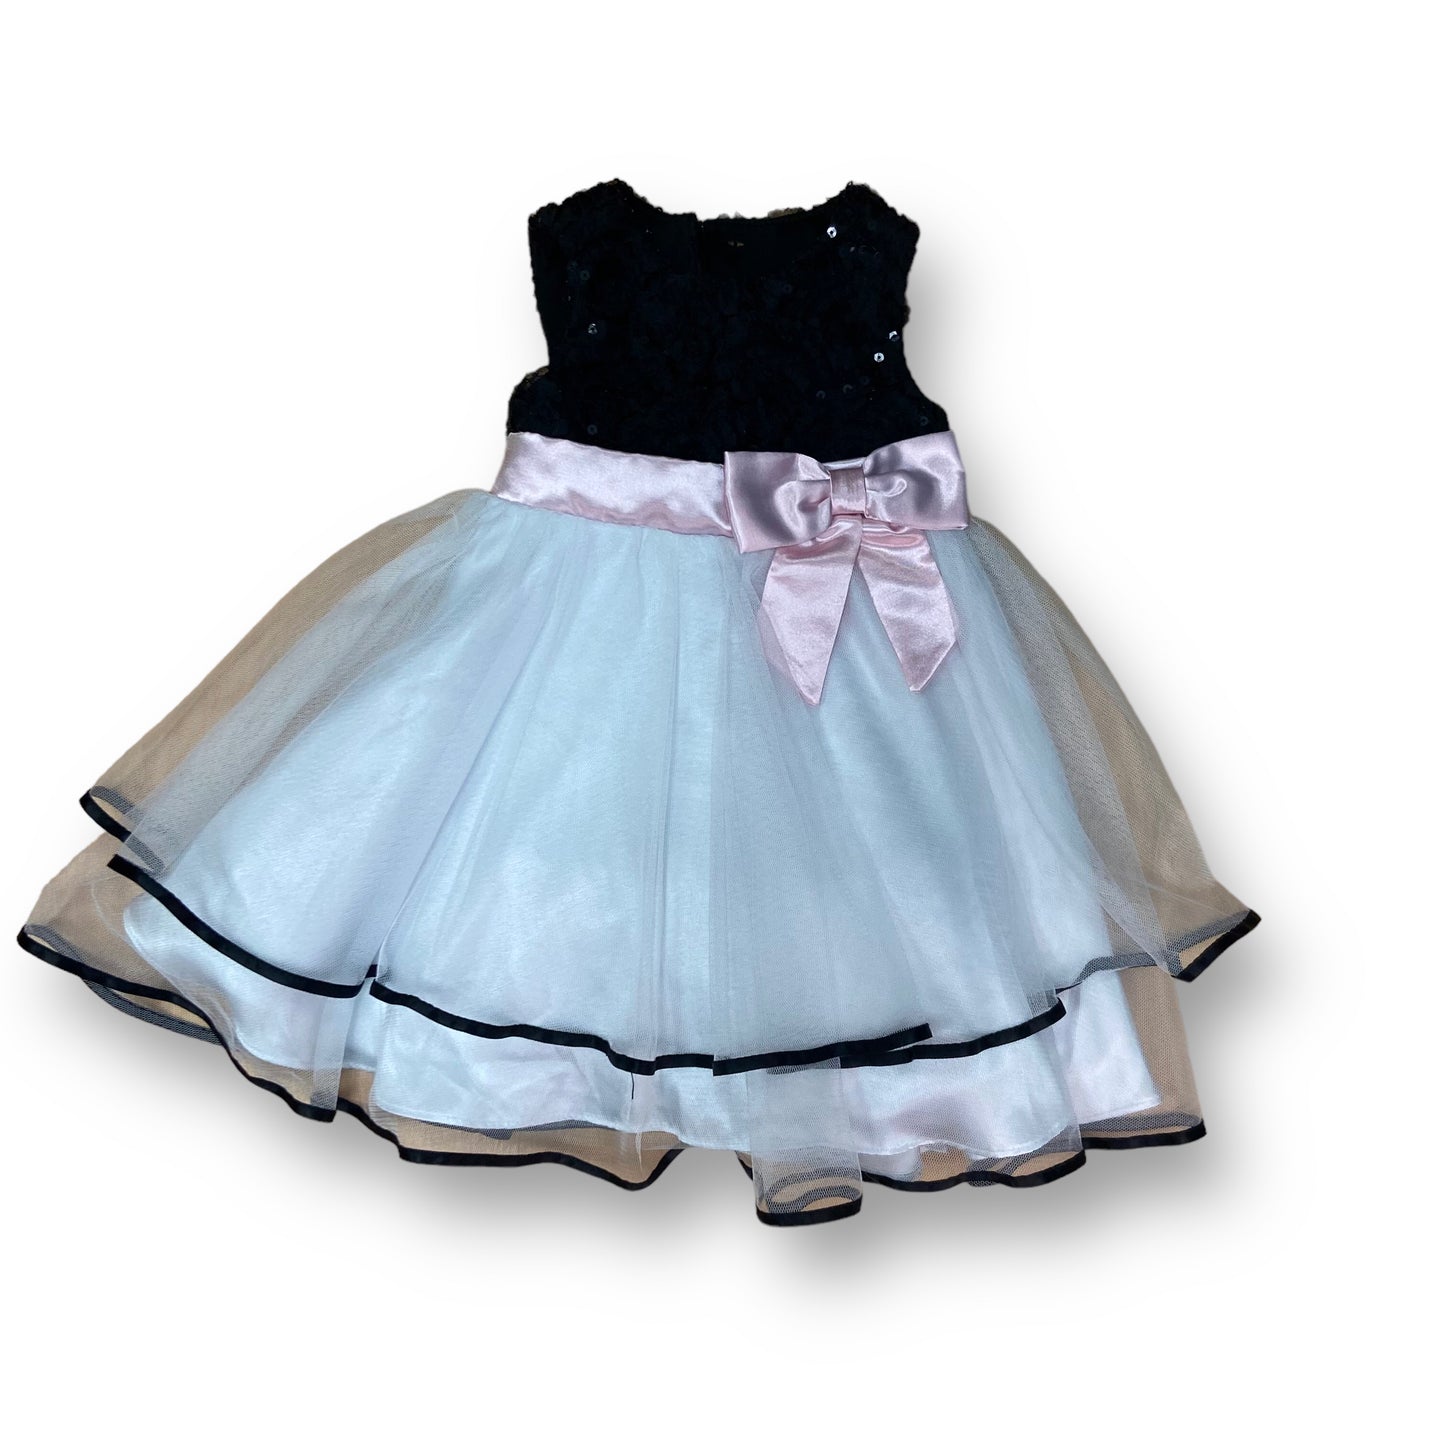 Girls Rare Editions Size 24 Months Black & White Tulle Bottom Dress